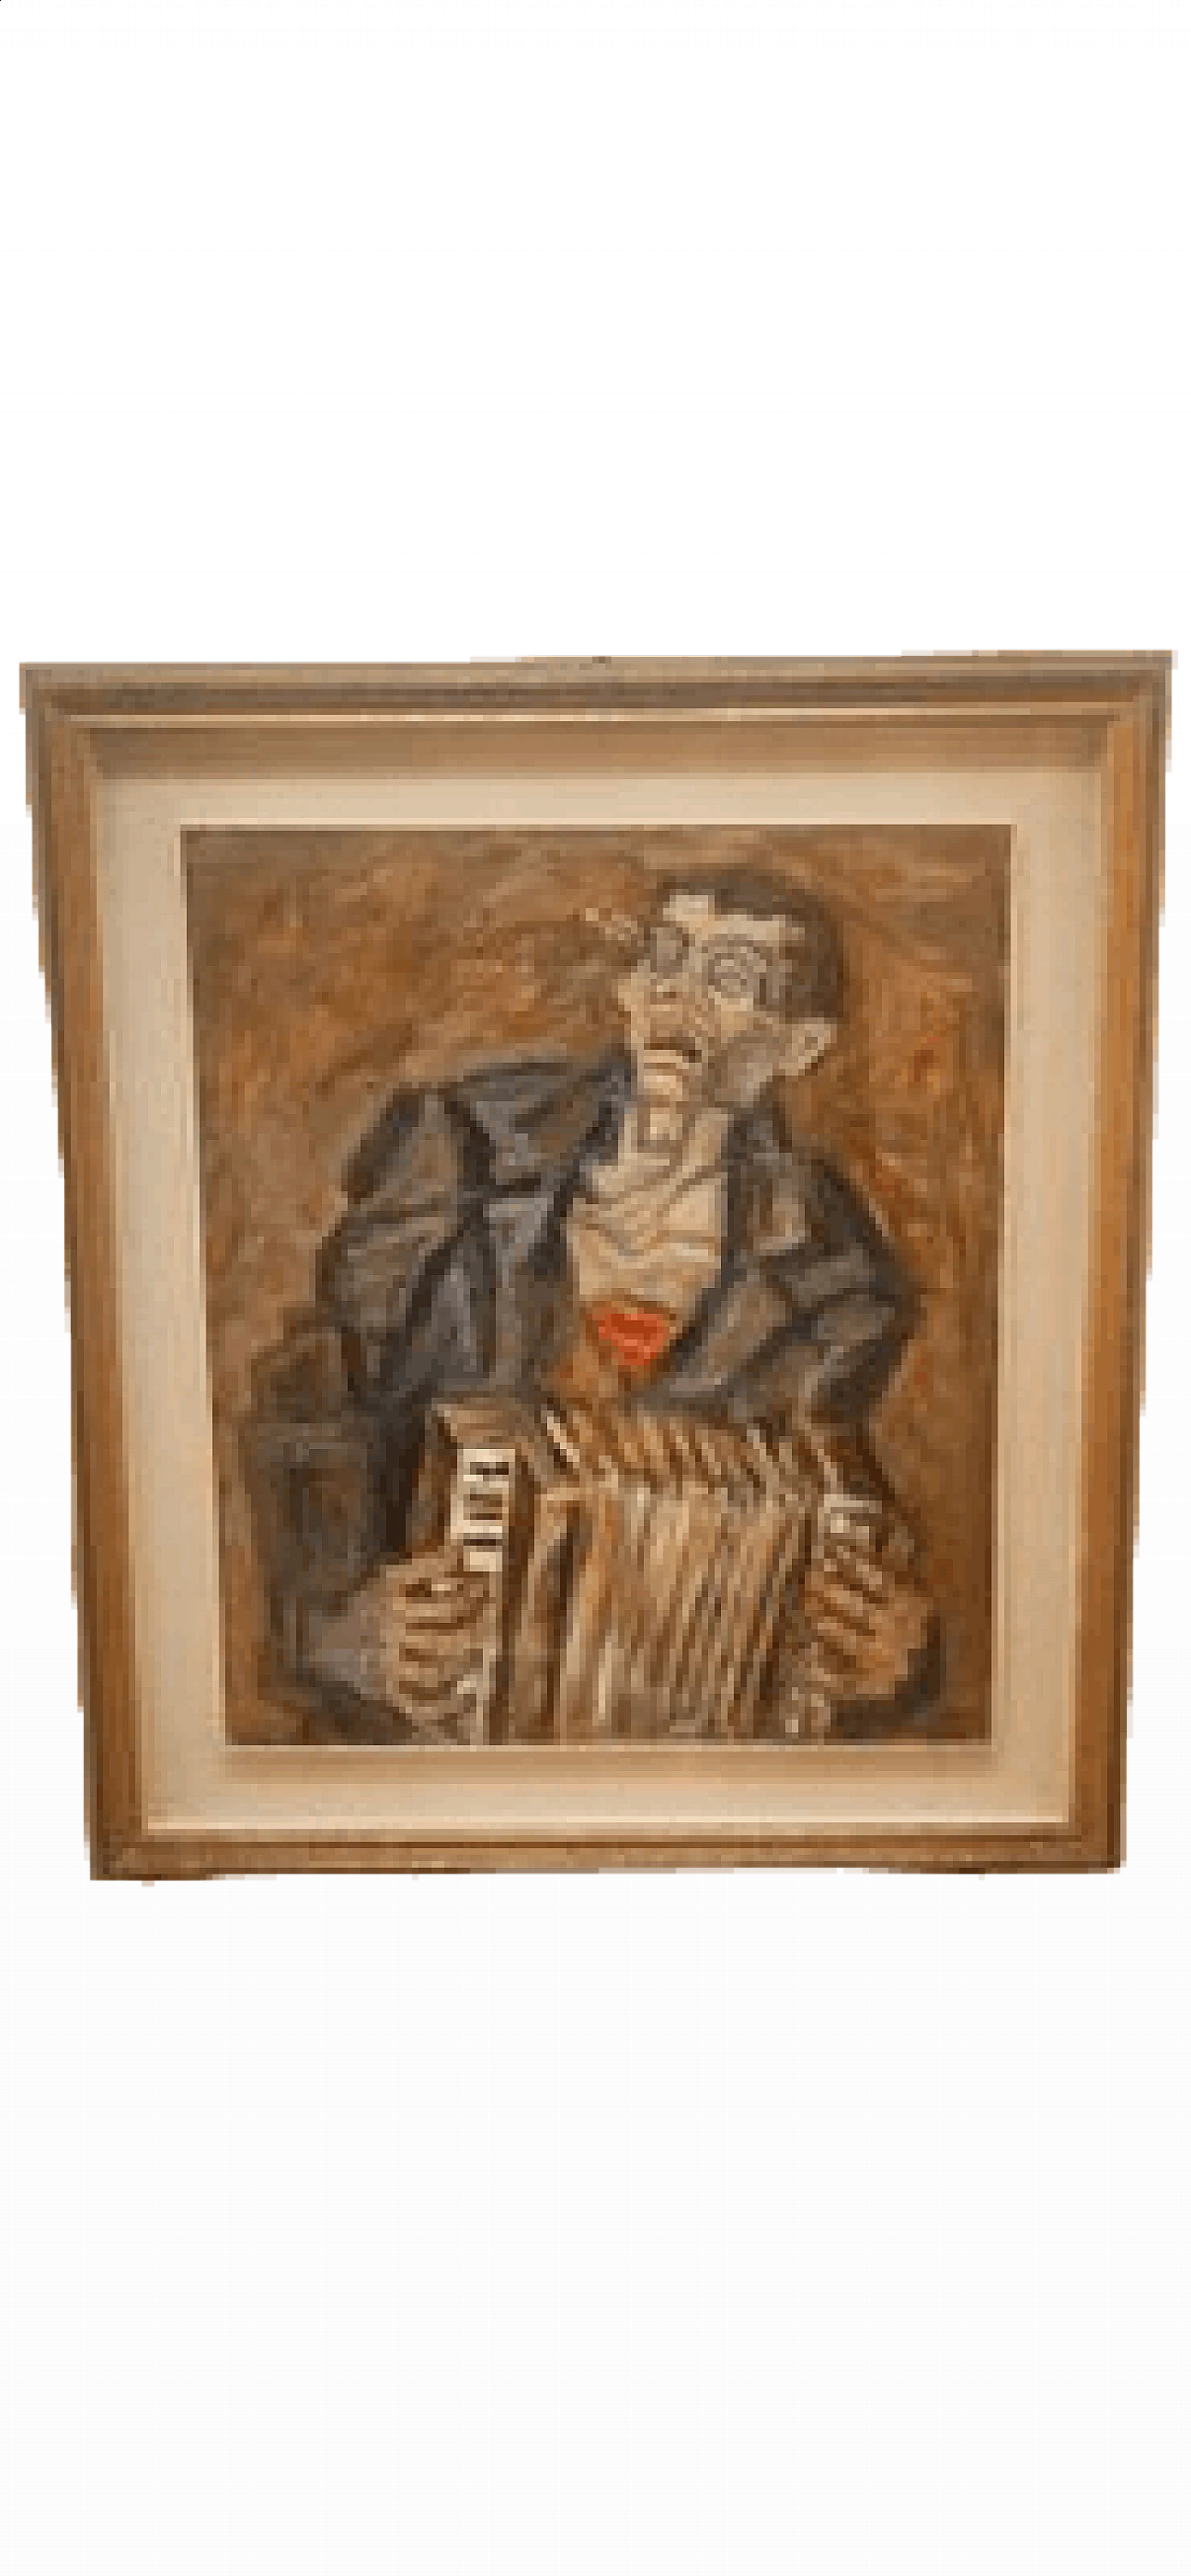 Emilio Notte, The blind musician, oil painting on canvas, 1970s 9